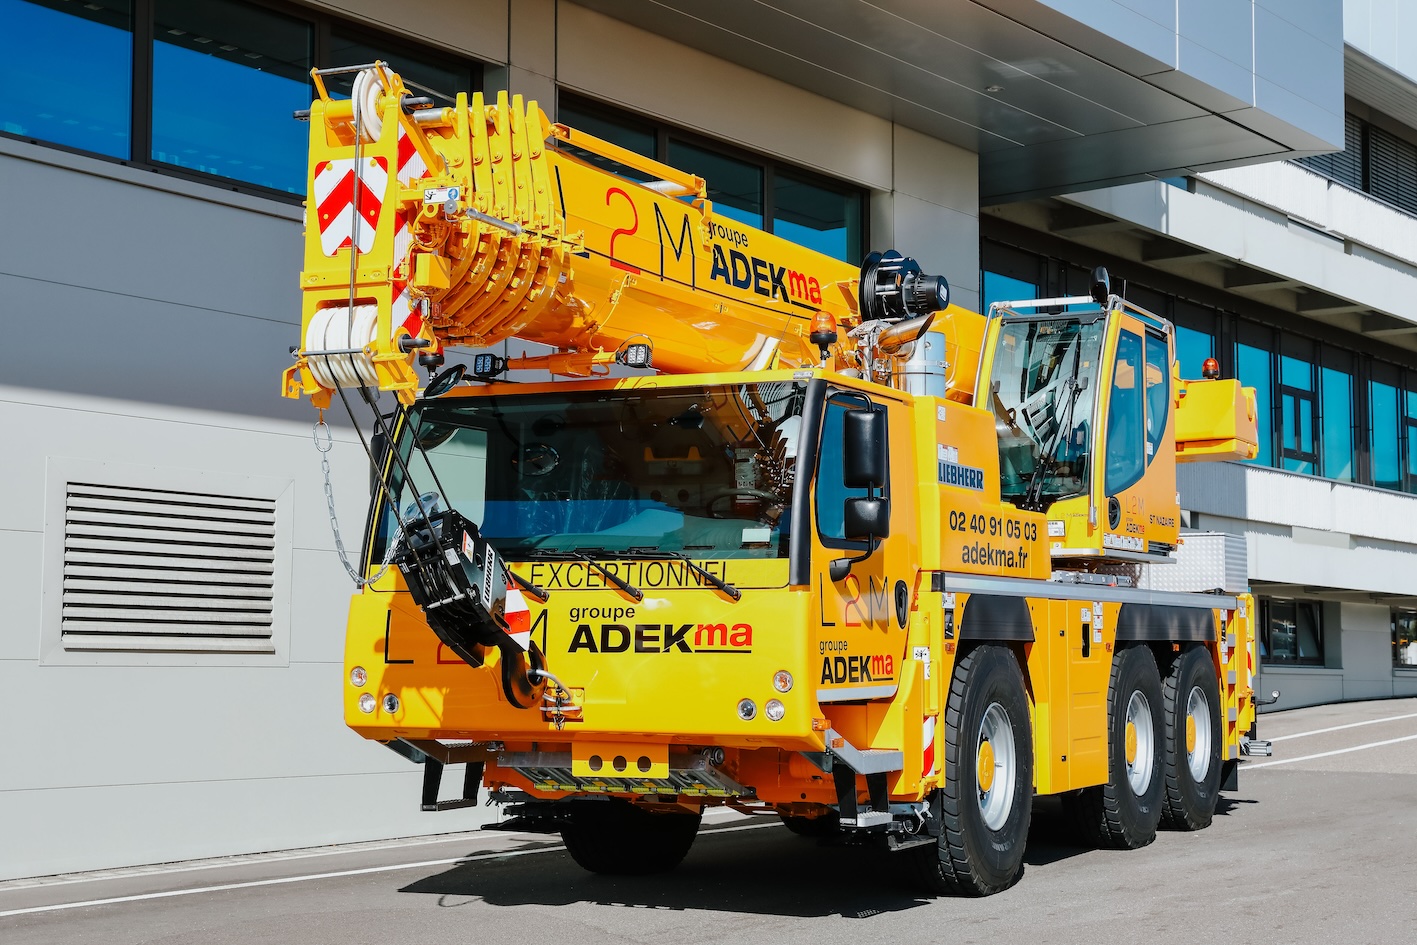 Adekma takes delivery of 3 new LTM1060-3.1 cranes